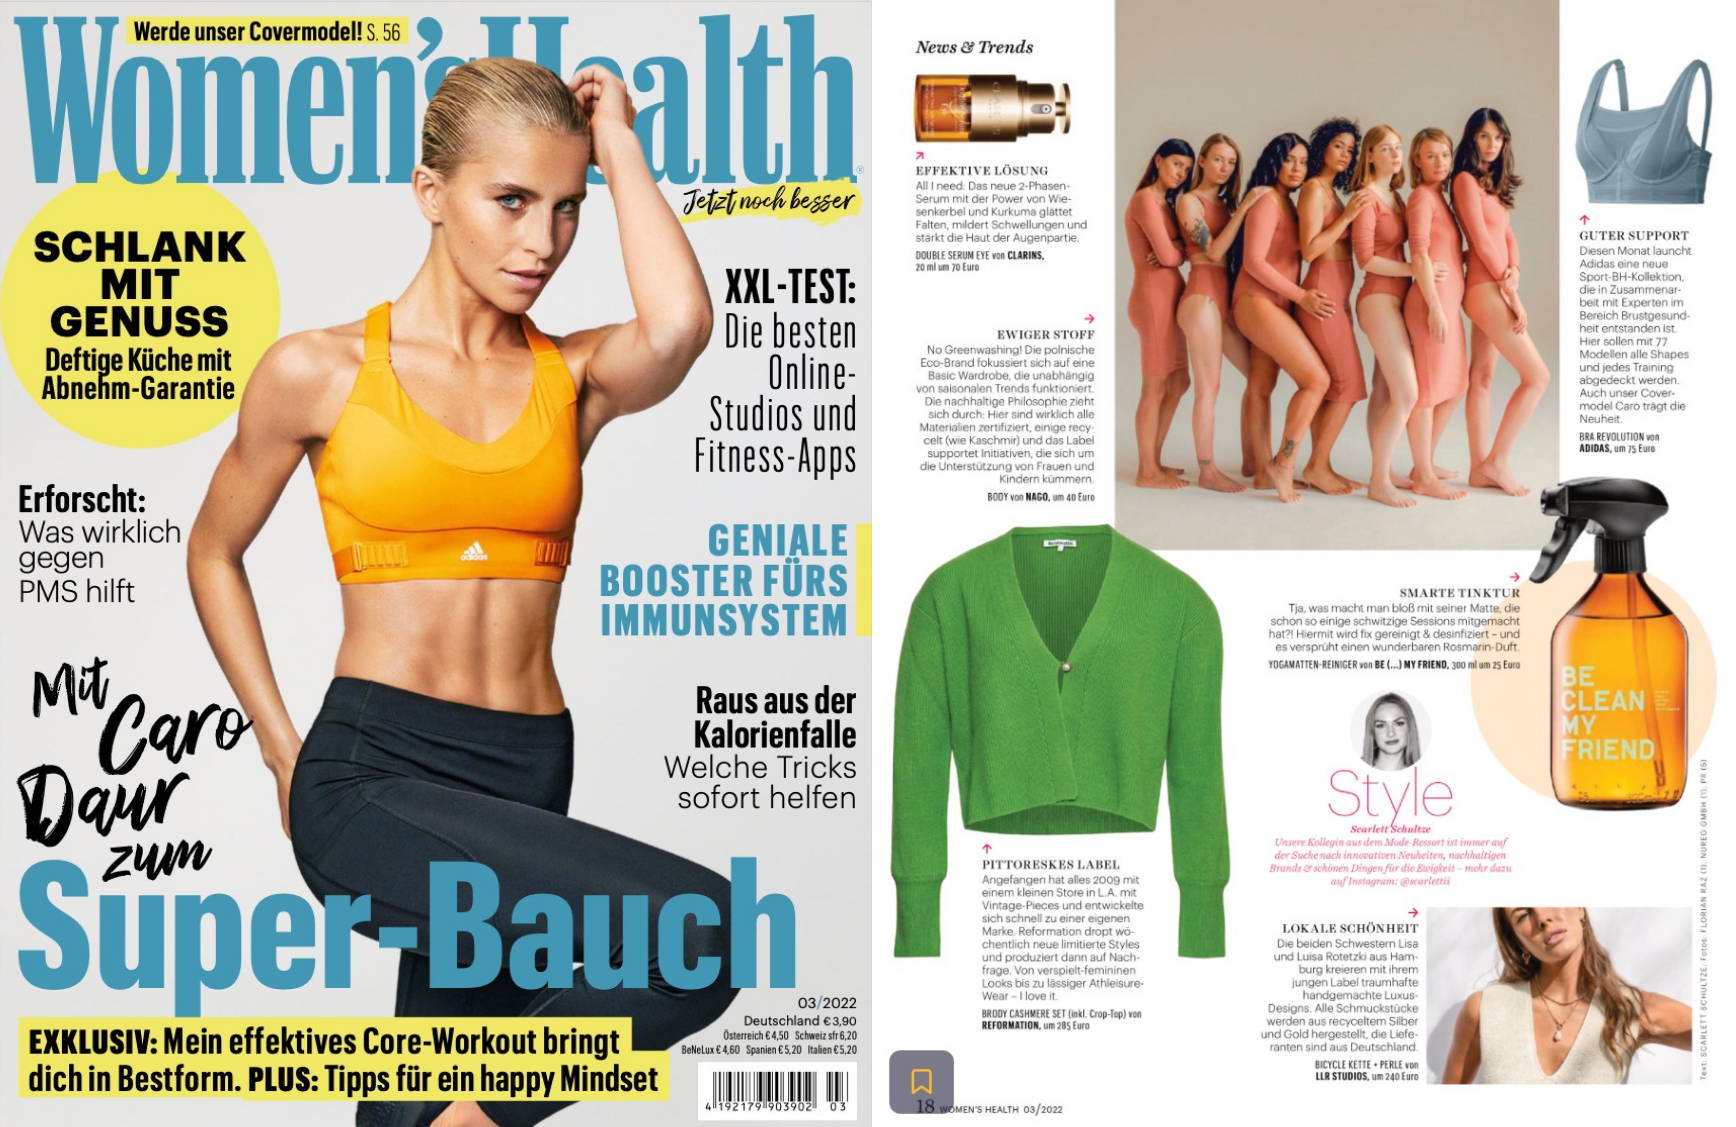 LLR Studios (a sustainable fine jewelry brand from Hamburg, Germany) 's feature in Women's Health Magazine: a picture of our Medium Link chain + Big Closure and our Big Link Chain + Big Closure in gold with a real freshwater pearl pendant